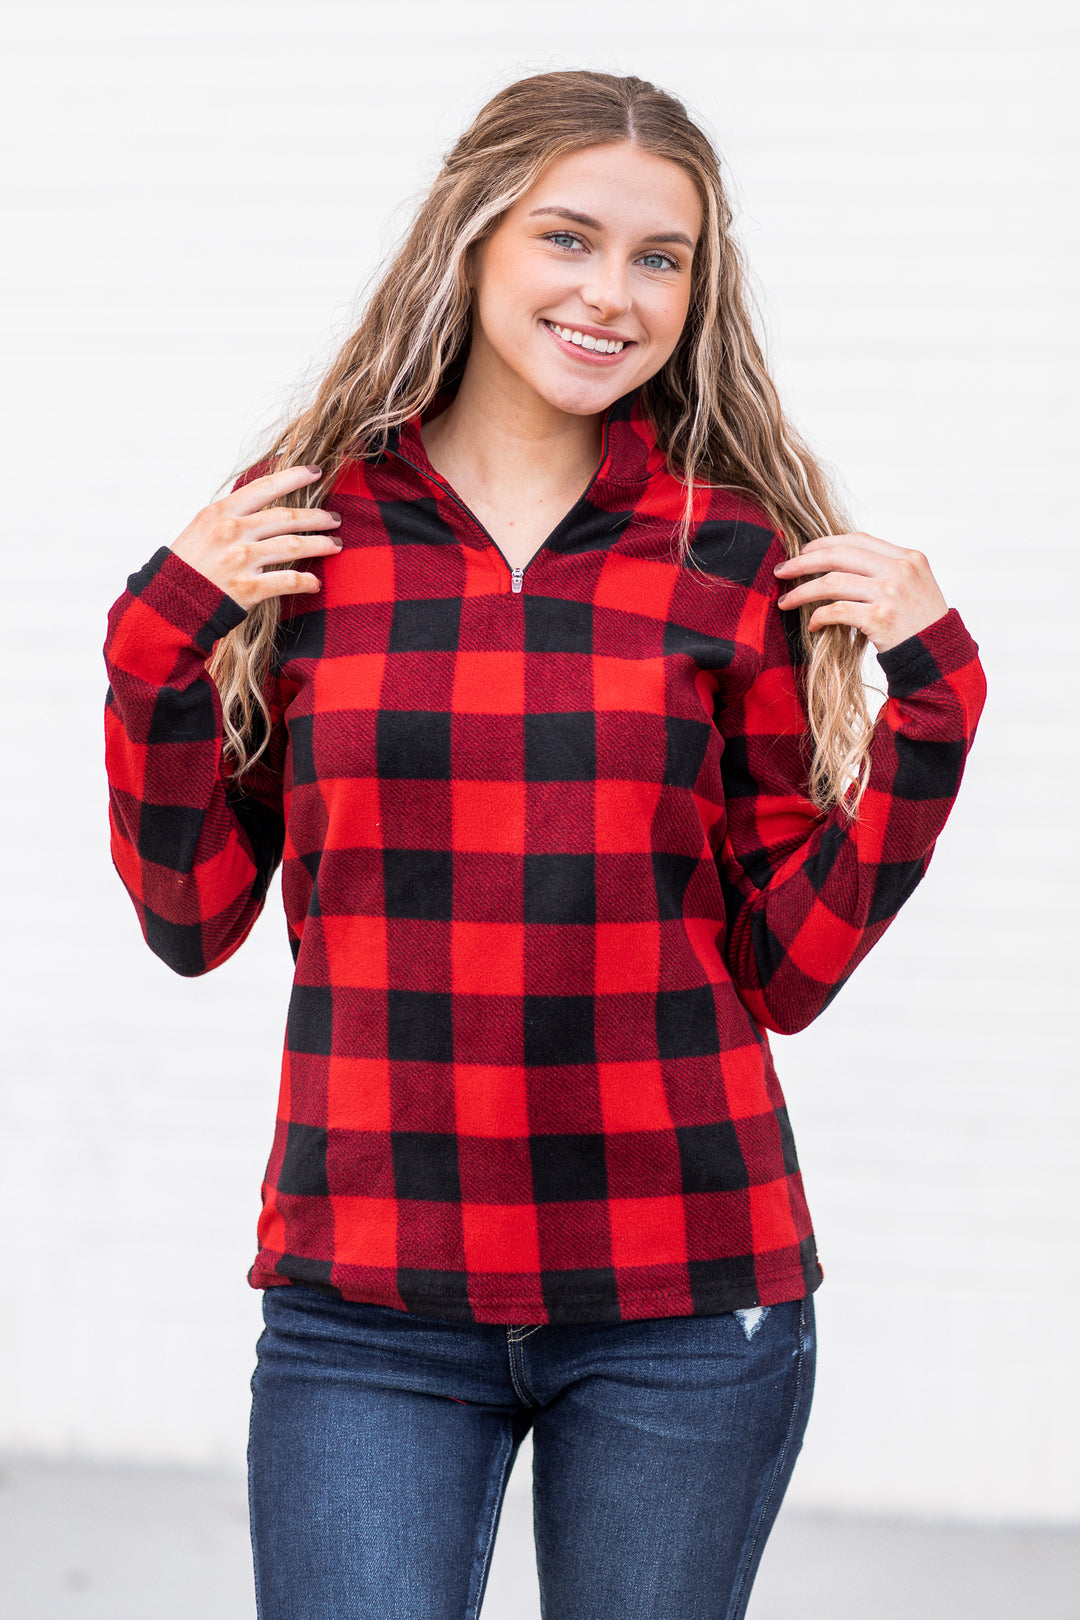 Freeport Microfleece Printed Pullover Red/Black Check